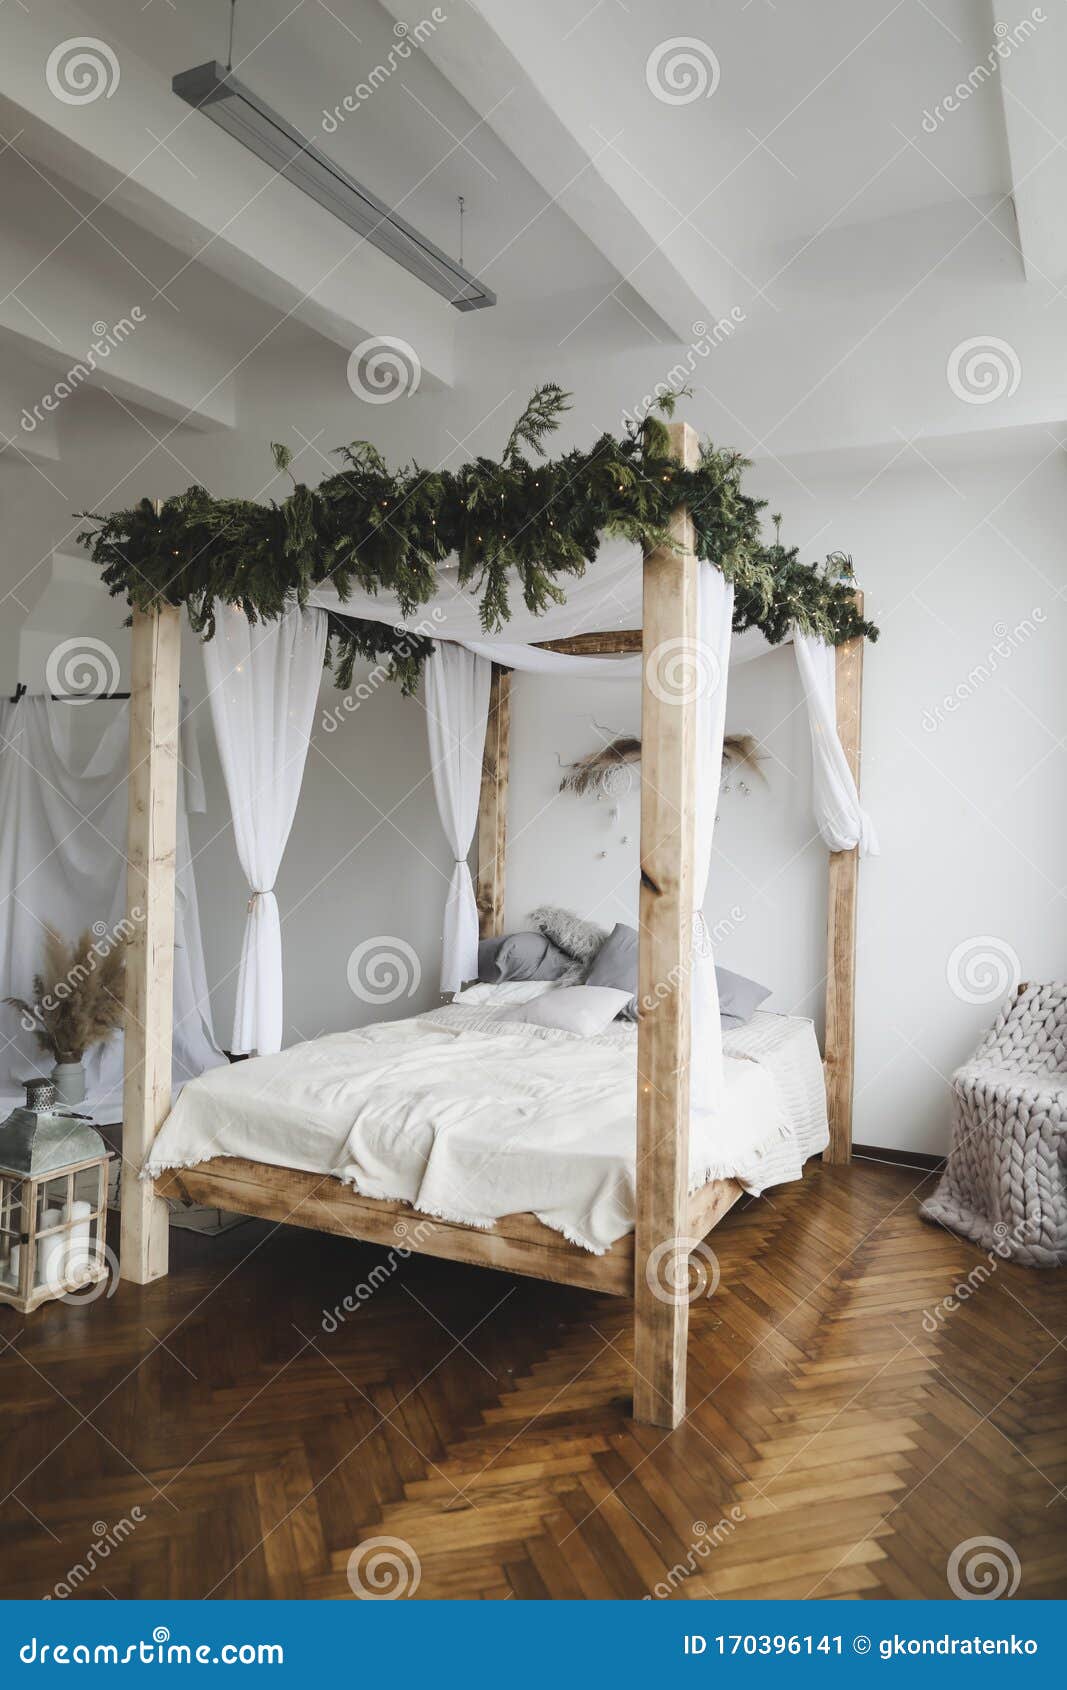 Modern Home Interior Design Bed With Wooden Canopy And Pillows Blanket Bedroom Interior Scandinavian Style Home Decor Stock Image Image Of Comfortable Honeymoon 170396141,Design Your Own Soccer Cleats